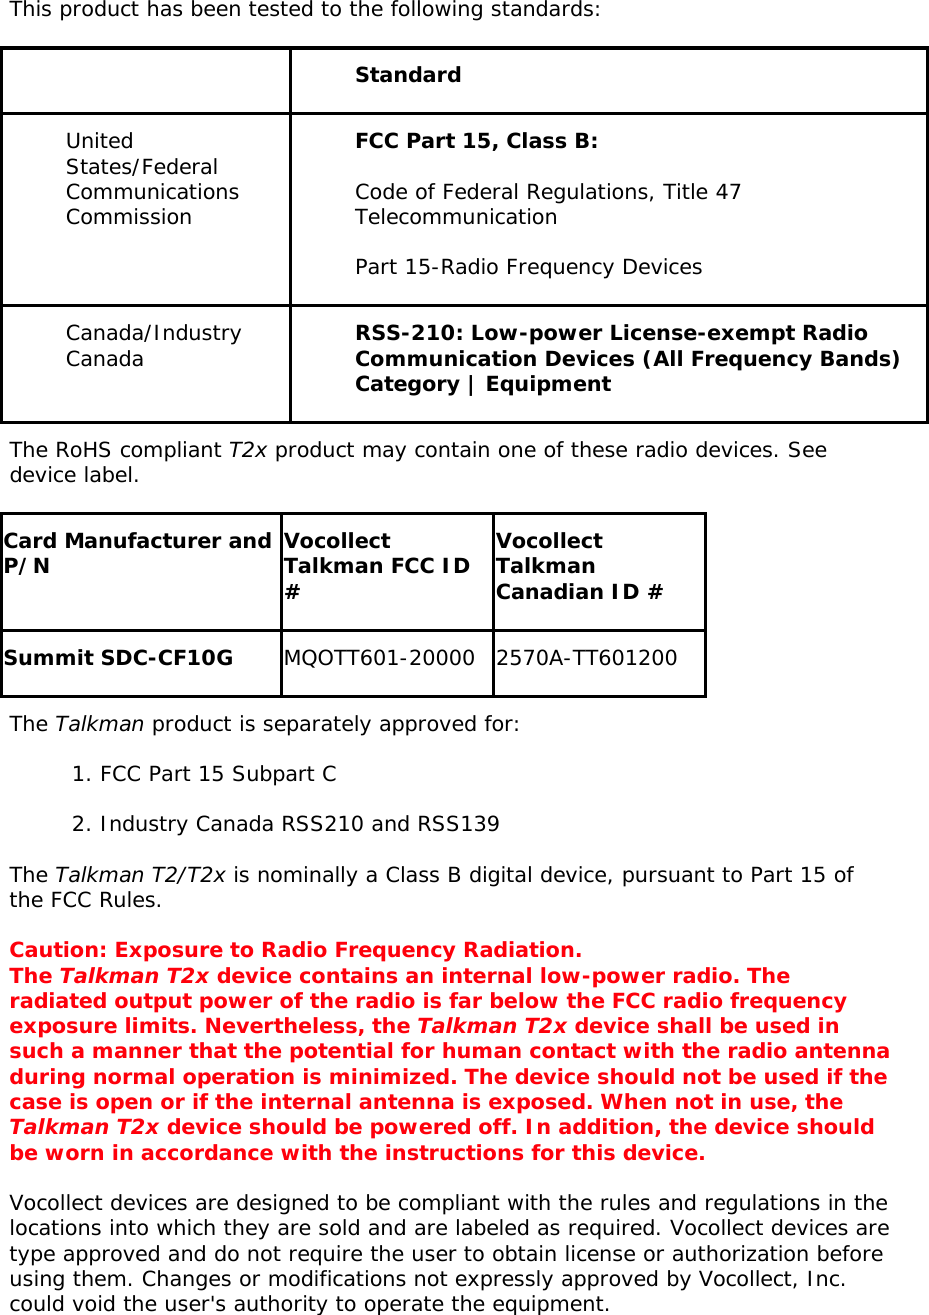 This product has been tested to the following standards:   Standard United States/Federal Communications Commission FCC Part 15, Class B: Code of Federal Regulations, Title 47 Telecommunication Part 15-Radio Frequency Devices Canada/Industry Canada  RSS-210: Low-power License-exempt Radio Communication Devices (All Frequency Bands) Category | Equipment The RoHS compliant T2x product may contain one of these radio devices. See device label.  Card Manufacturer and P/N Vocollect Talkman FCC ID # Vocollect Talkman Canadian ID # Summit SDC-CF10G  MQOTT601-20000 2570A-TT601200 The Talkman product is separately approved for: 1. FCC Part 15 Subpart C  2. Industry Canada RSS210 and RSS139  The Talkman T2/T2x is nominally a Class B digital device, pursuant to Part 15 of the FCC Rules. Caution: Exposure to Radio Frequency Radiation.  The Talkman T2x device contains an internal low-power radio. The radiated output power of the radio is far below the FCC radio frequency exposure limits. Nevertheless, the Talkman T2x device shall be used in such a manner that the potential for human contact with the radio antenna during normal operation is minimized. The device should not be used if the case is open or if the internal antenna is exposed. When not in use, the Talkman T2x device should be powered off. In addition, the device should be worn in accordance with the instructions for this device. Vocollect devices are designed to be compliant with the rules and regulations in the locations into which they are sold and are labeled as required. Vocollect devices are type approved and do not require the user to obtain license or authorization before using them. Changes or modifications not expressly approved by Vocollect, Inc. could void the user&apos;s authority to operate the equipment. 